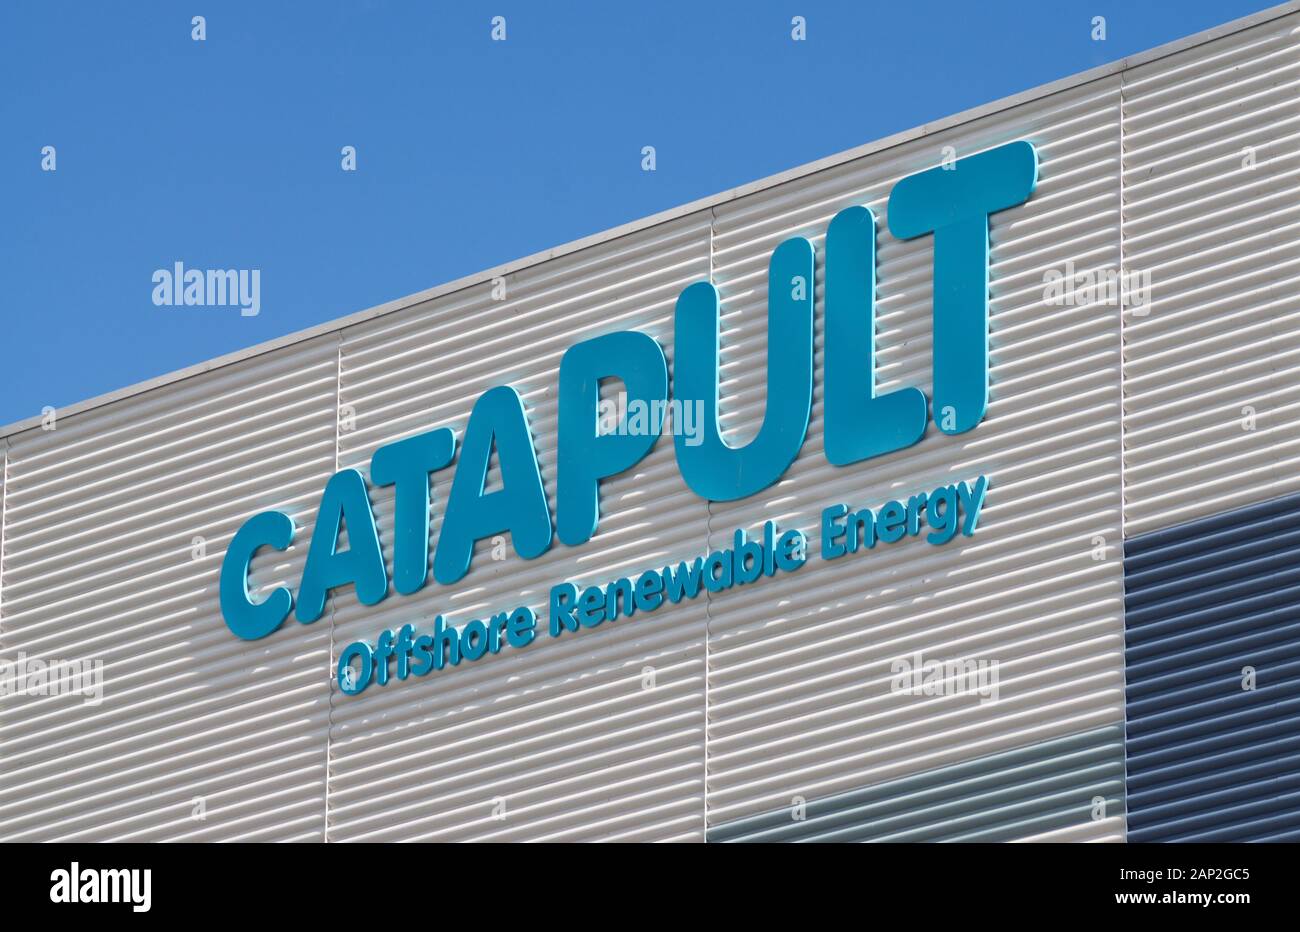 Catapult, the logo of the offshore renewable energy research centre in Blyth, Northumberland, England, UK Stock Photo